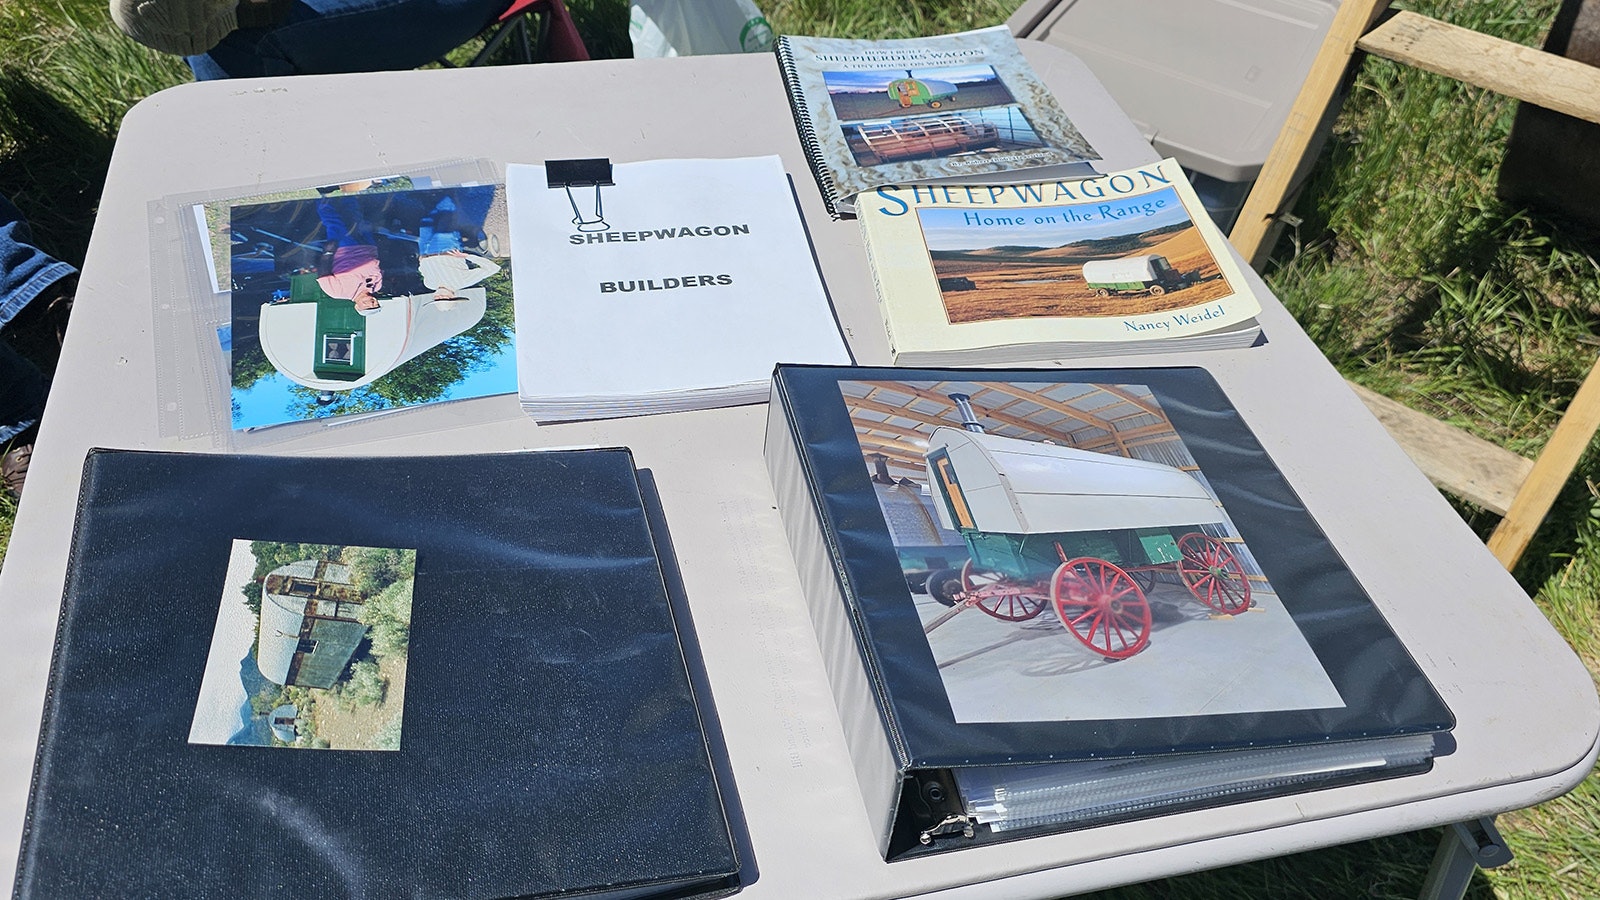 "Sheepwagon Builders," center, is a book in progress about the history of sheepwagons. Lora O'Rourke's husband was working on the book before he died, and she brought it to the festival to share with other sheepwagon enthuiasts. Around it are scrapbooks showing some of the sheepwagons Lora and Jim restored.